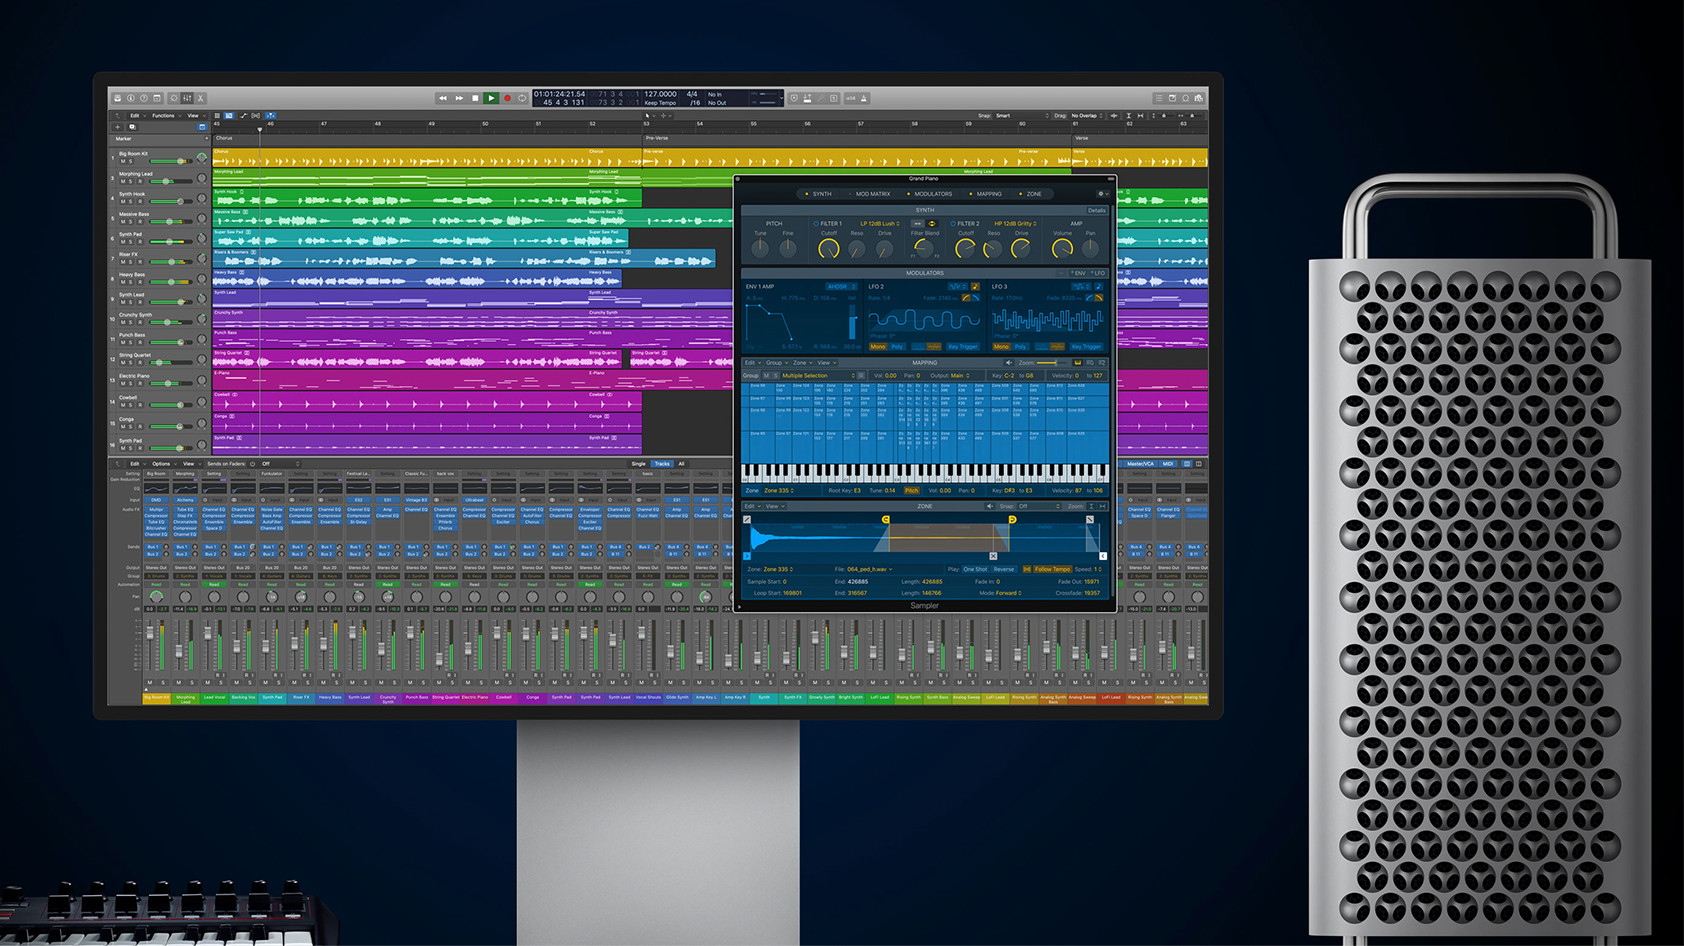 This is a picture of Logic Pro X running on a Mac Pro